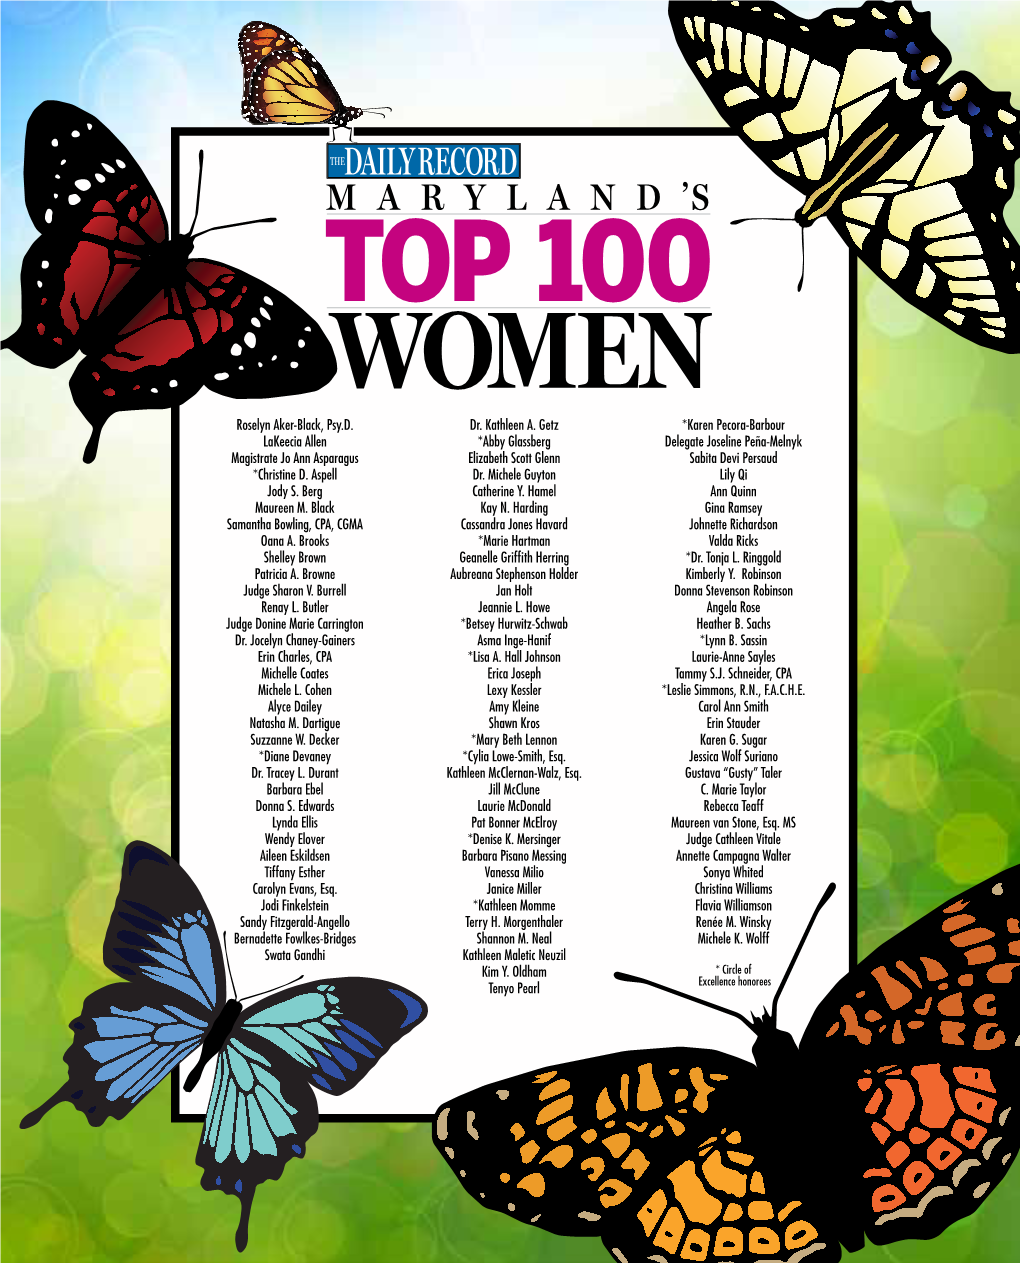 THE DAILY RECORD's MARYLAND's TOP 100 WOMEN 2018 1 Roselyn